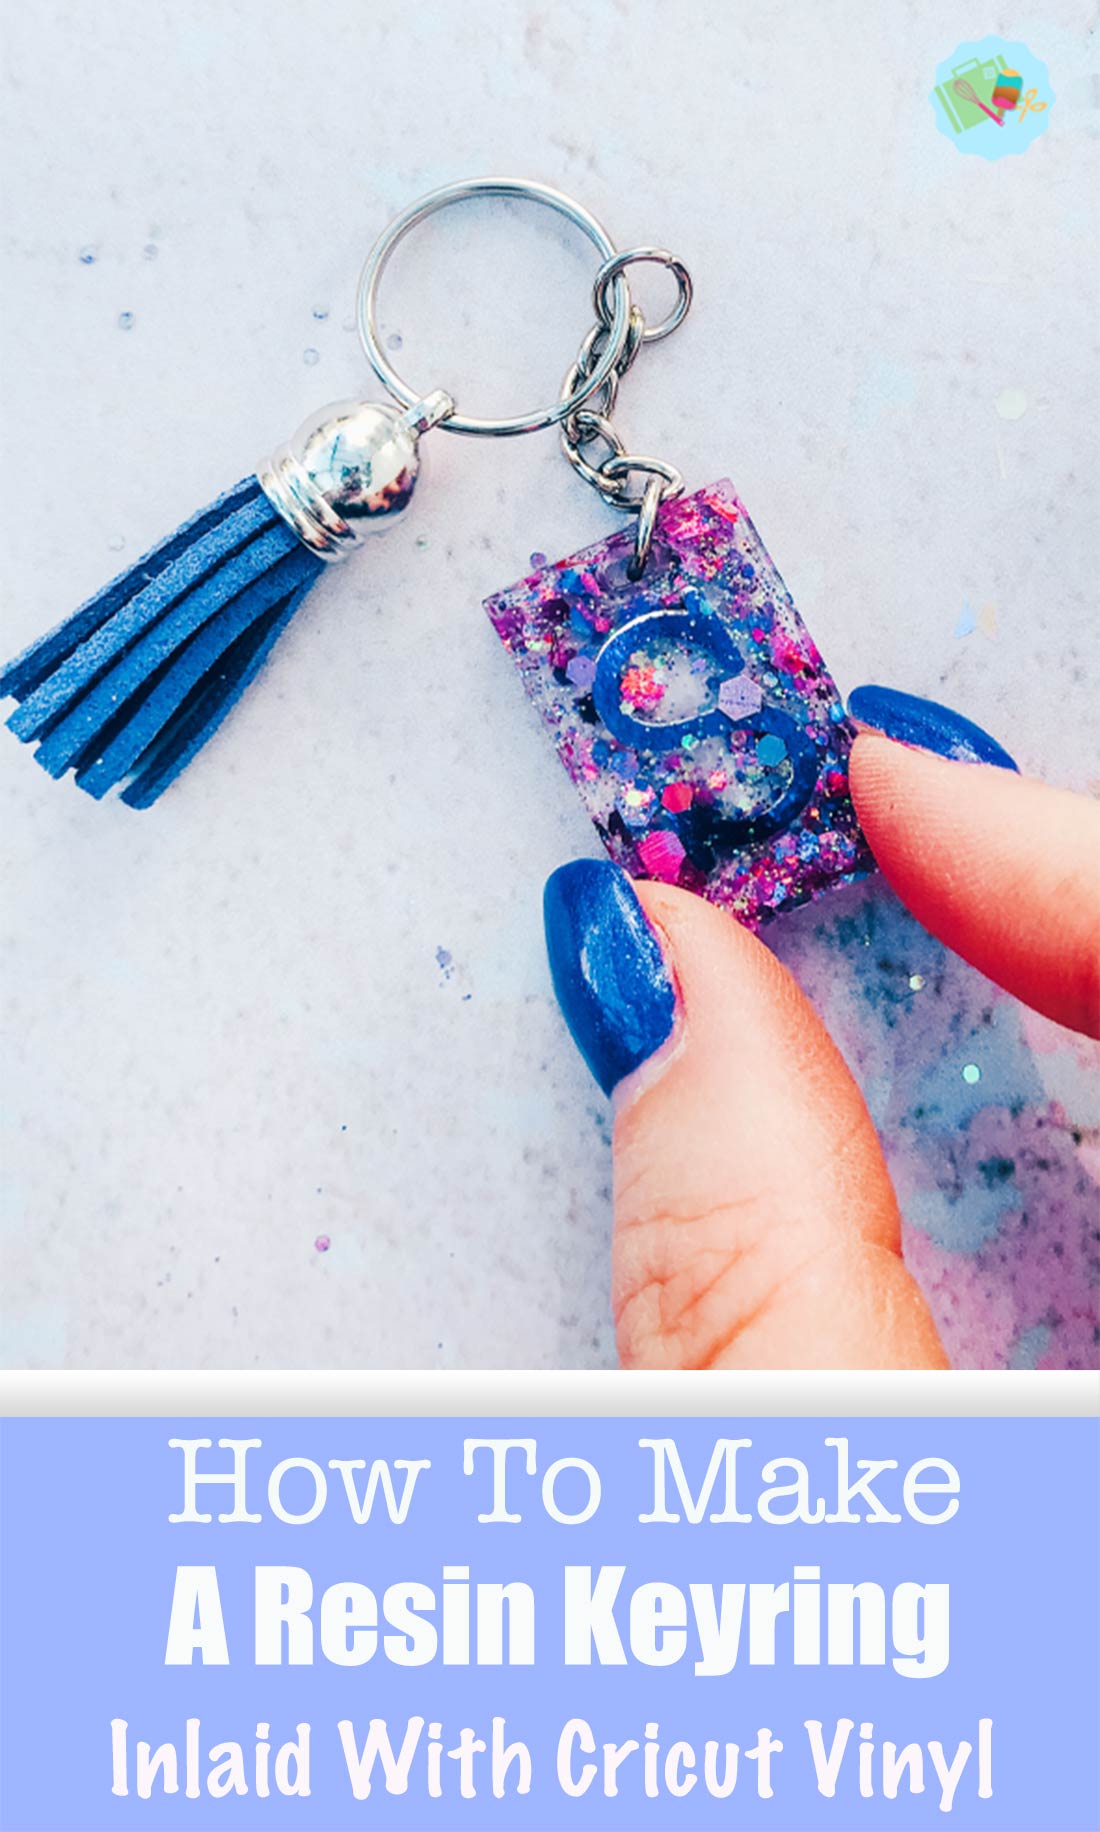 How to make a REsin Keyring inlaid with Cricut Vinyl